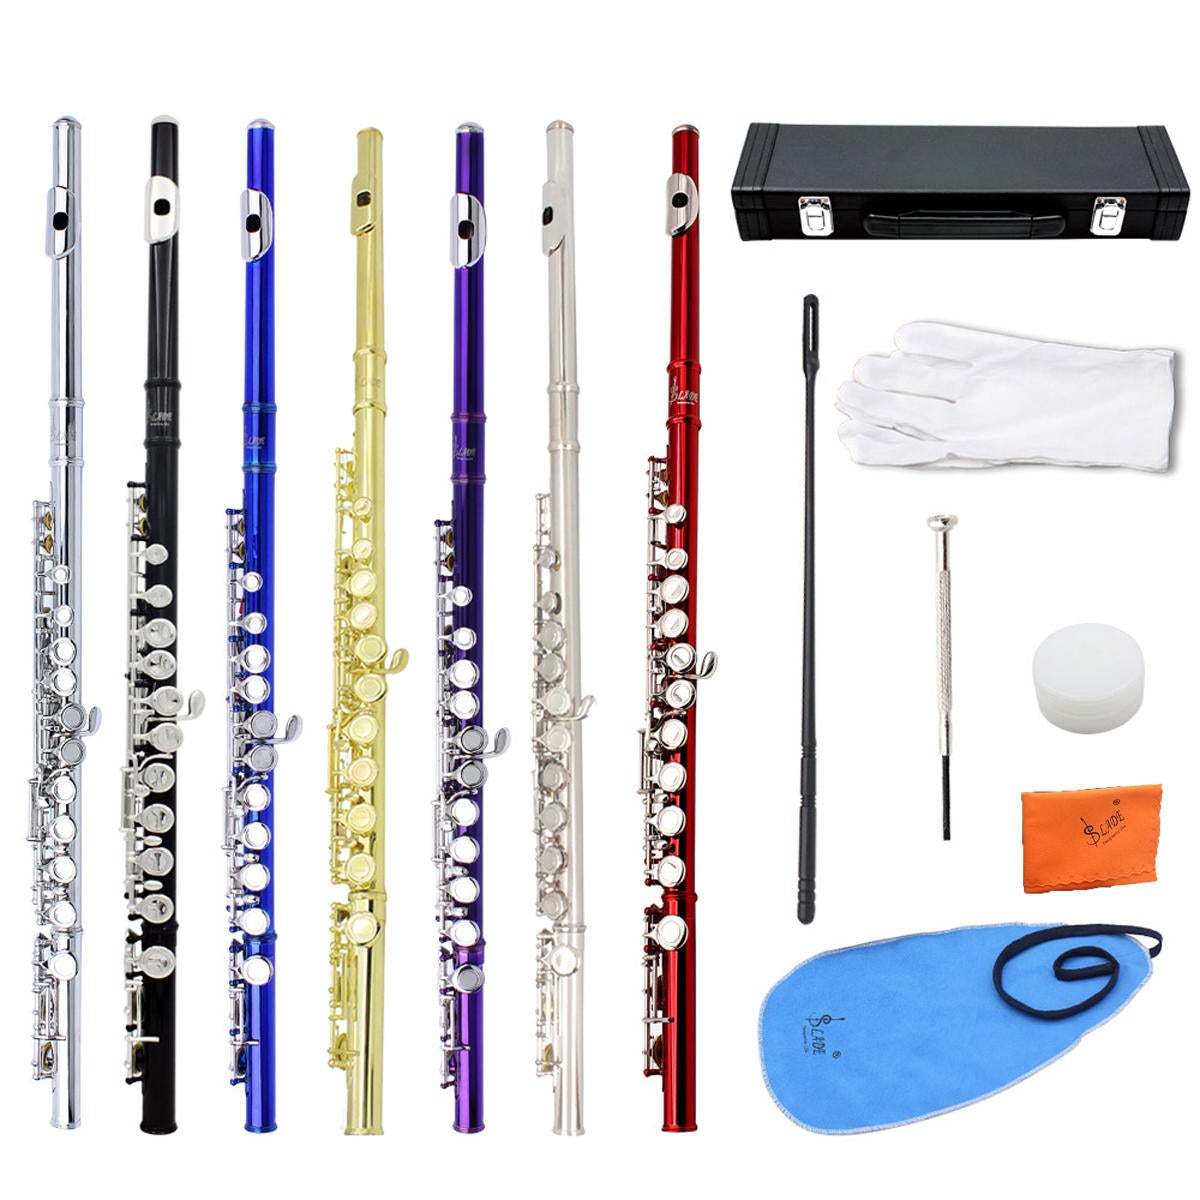 16 Holes C Key Flute Copper with Cloth Screwdriver Gloves Bag Wiith Blue&Orange Cleaning Cloth